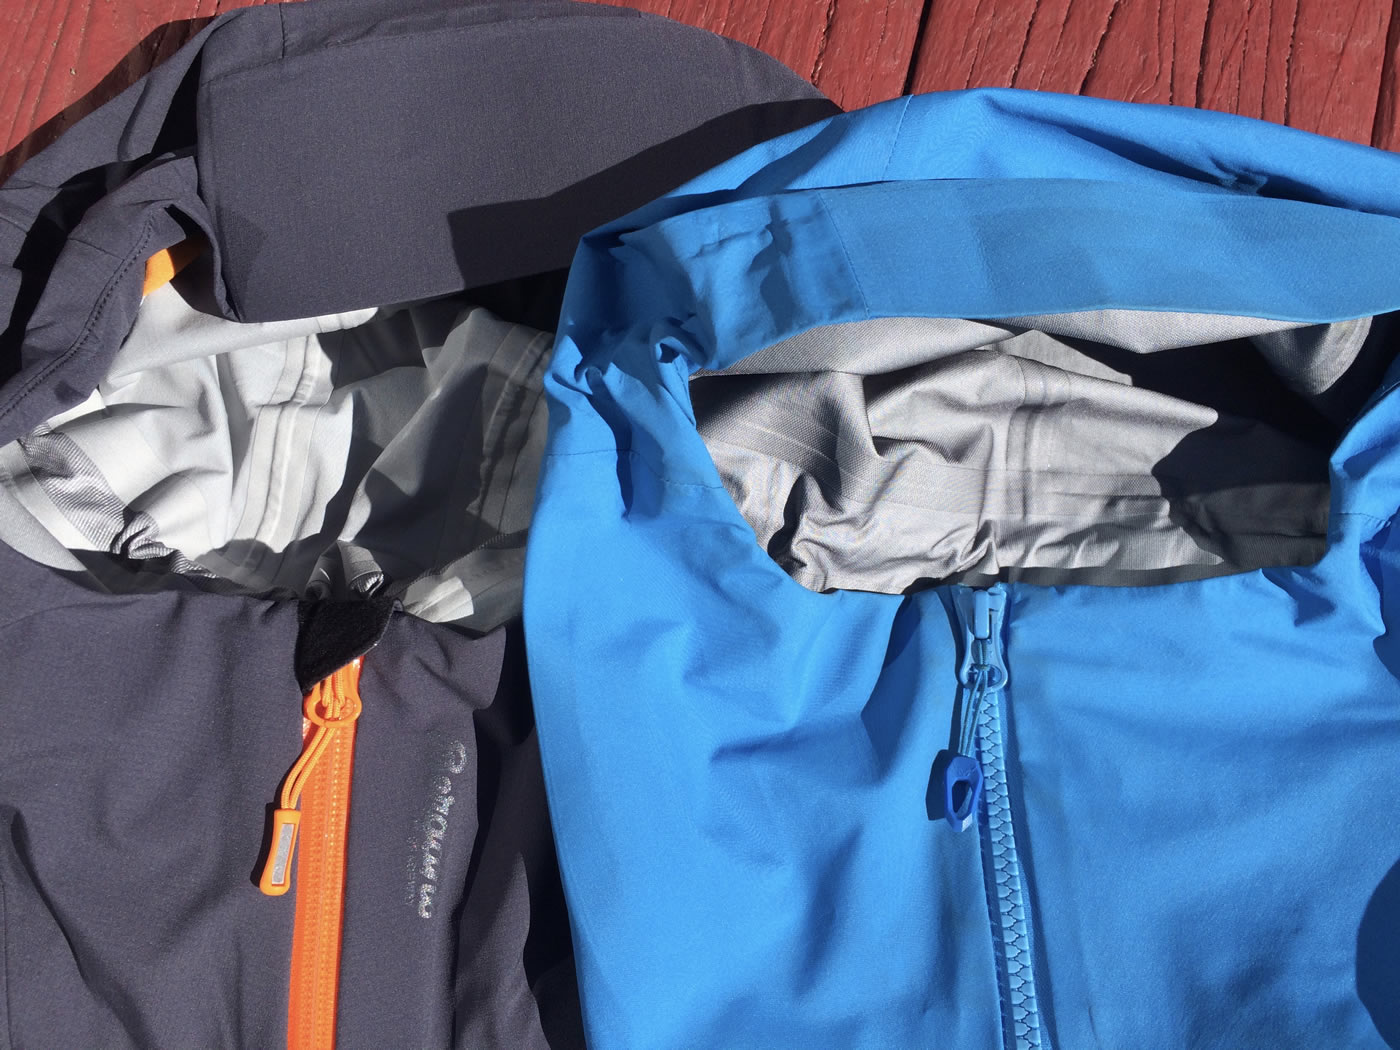 The Bergans Storen Jacket (left), compared with the Dynafit Yotei GTX Jacket (right), has a zipper shed to protect the chin and nose from direct contact with the zipper. [Photo] Mike Lewis